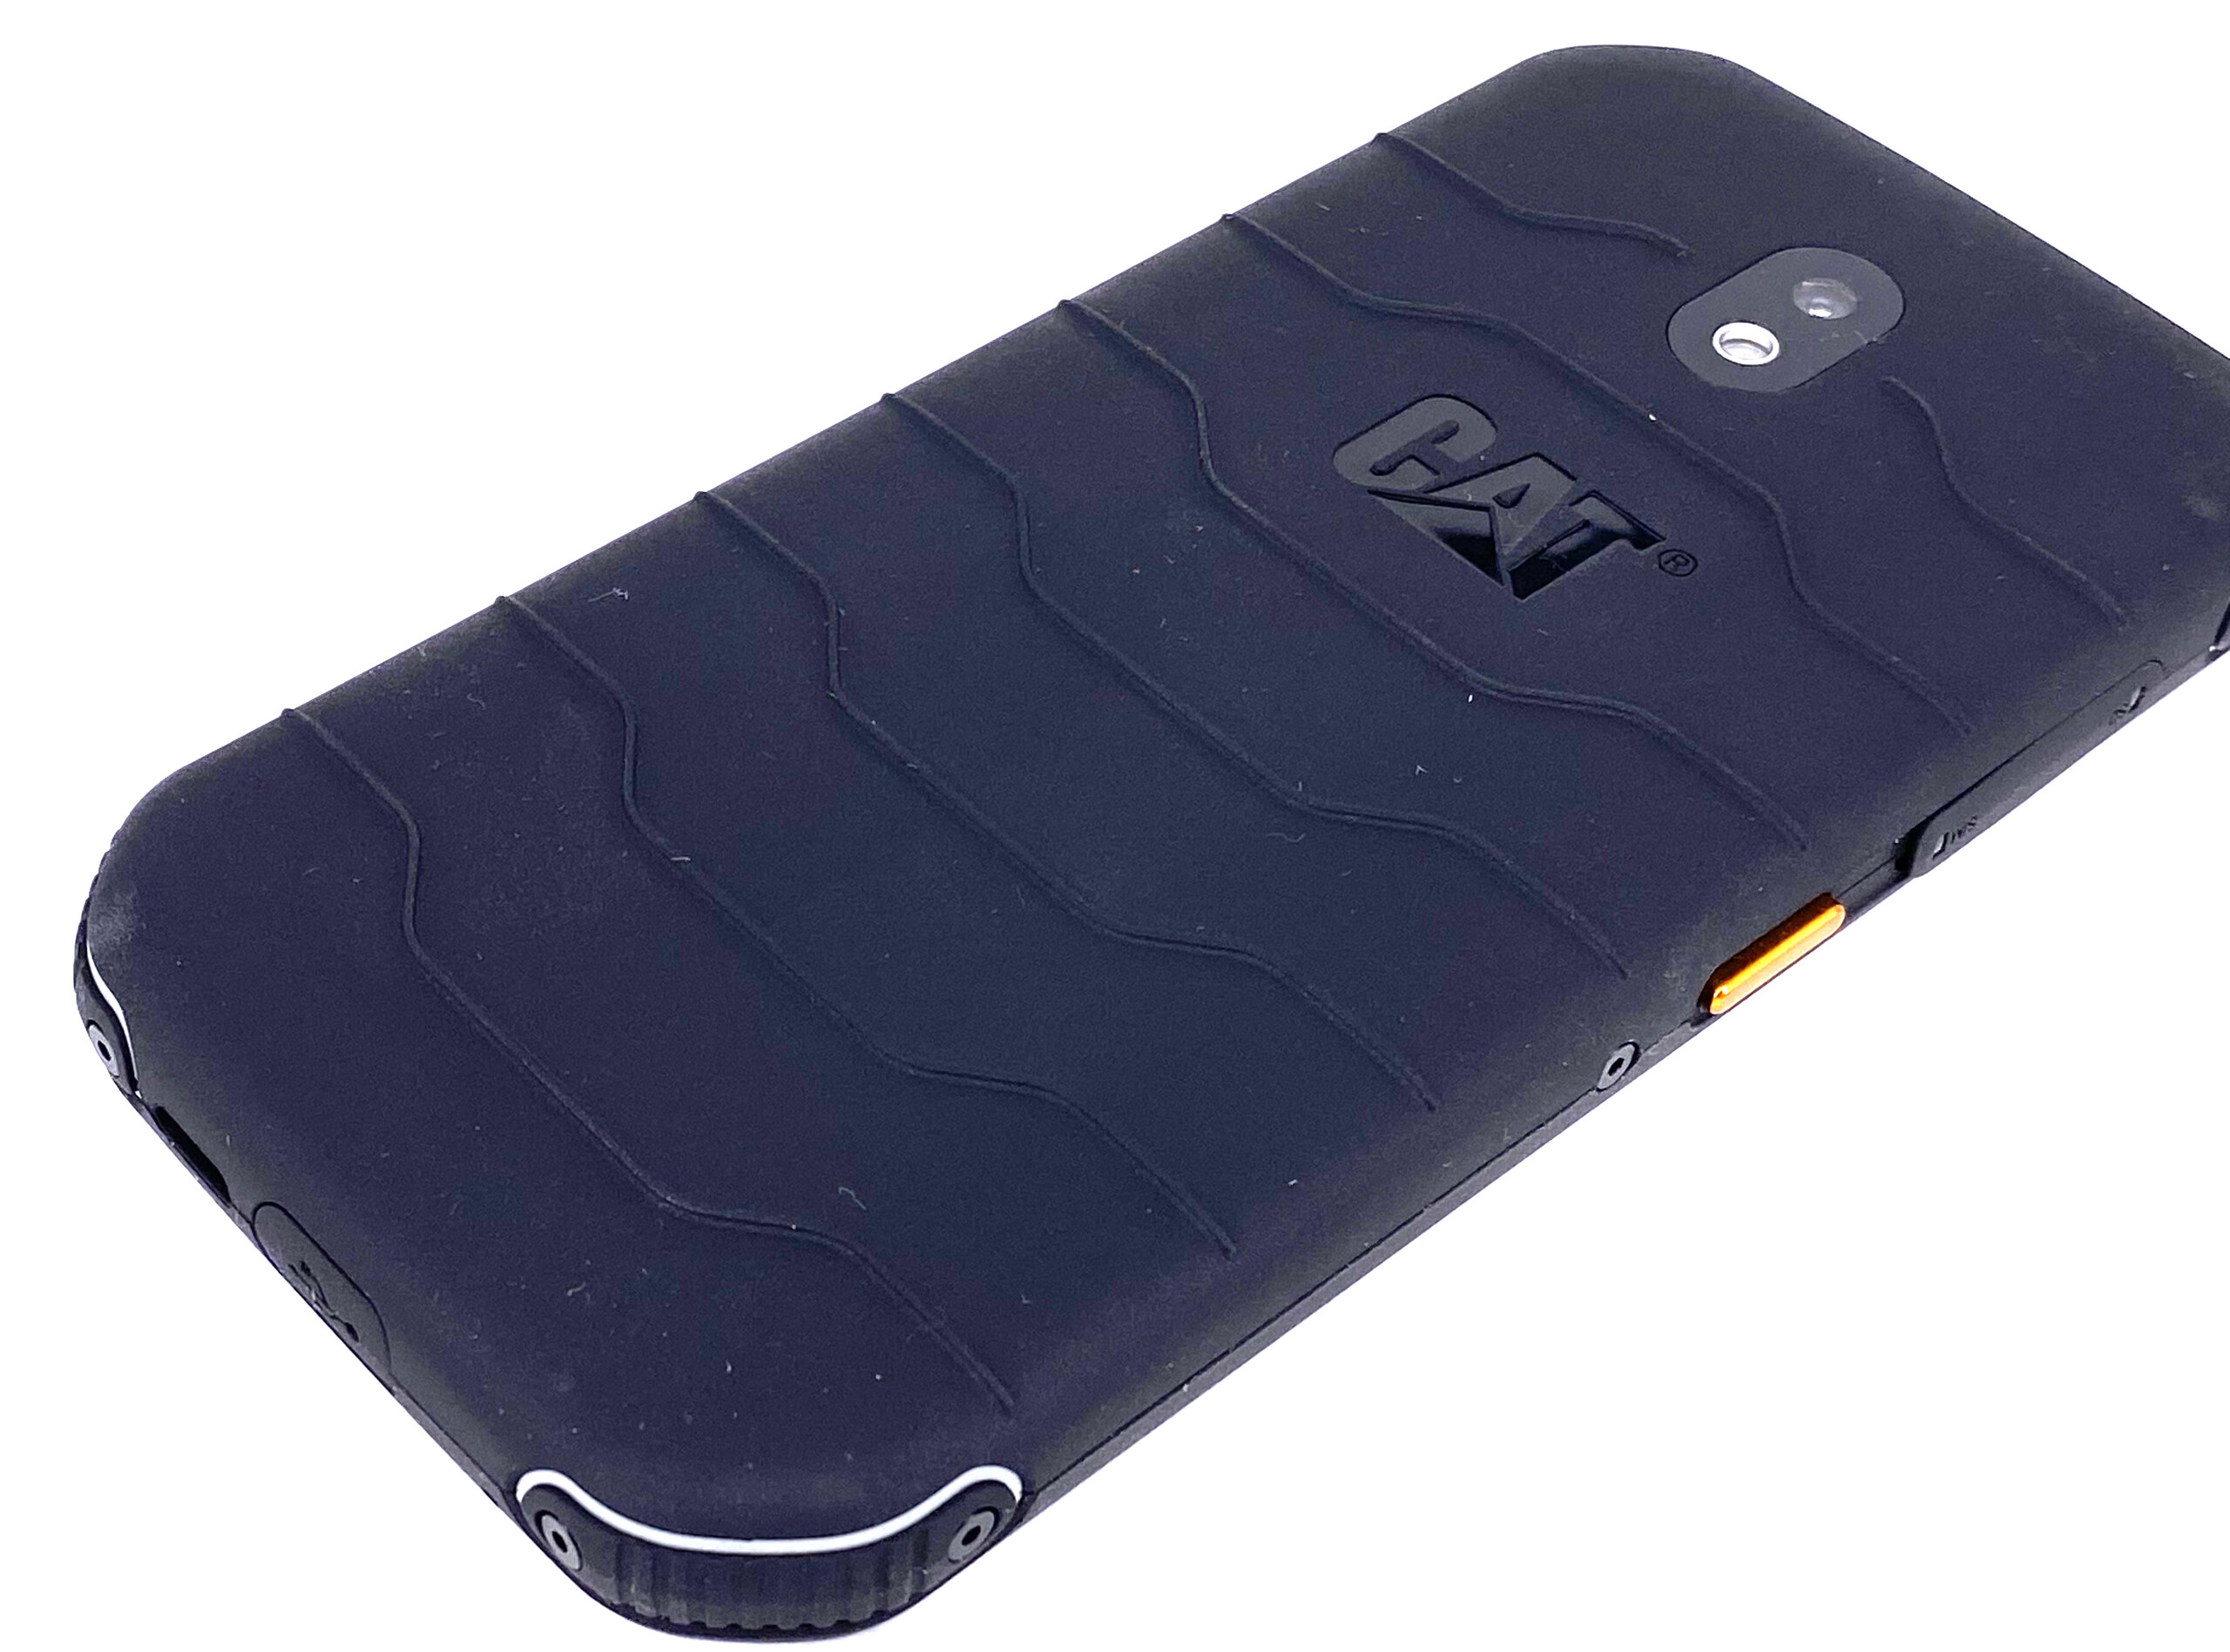 CAT S42 Smartphone Review – Robust, rubberised and washable smartphone -   Reviews